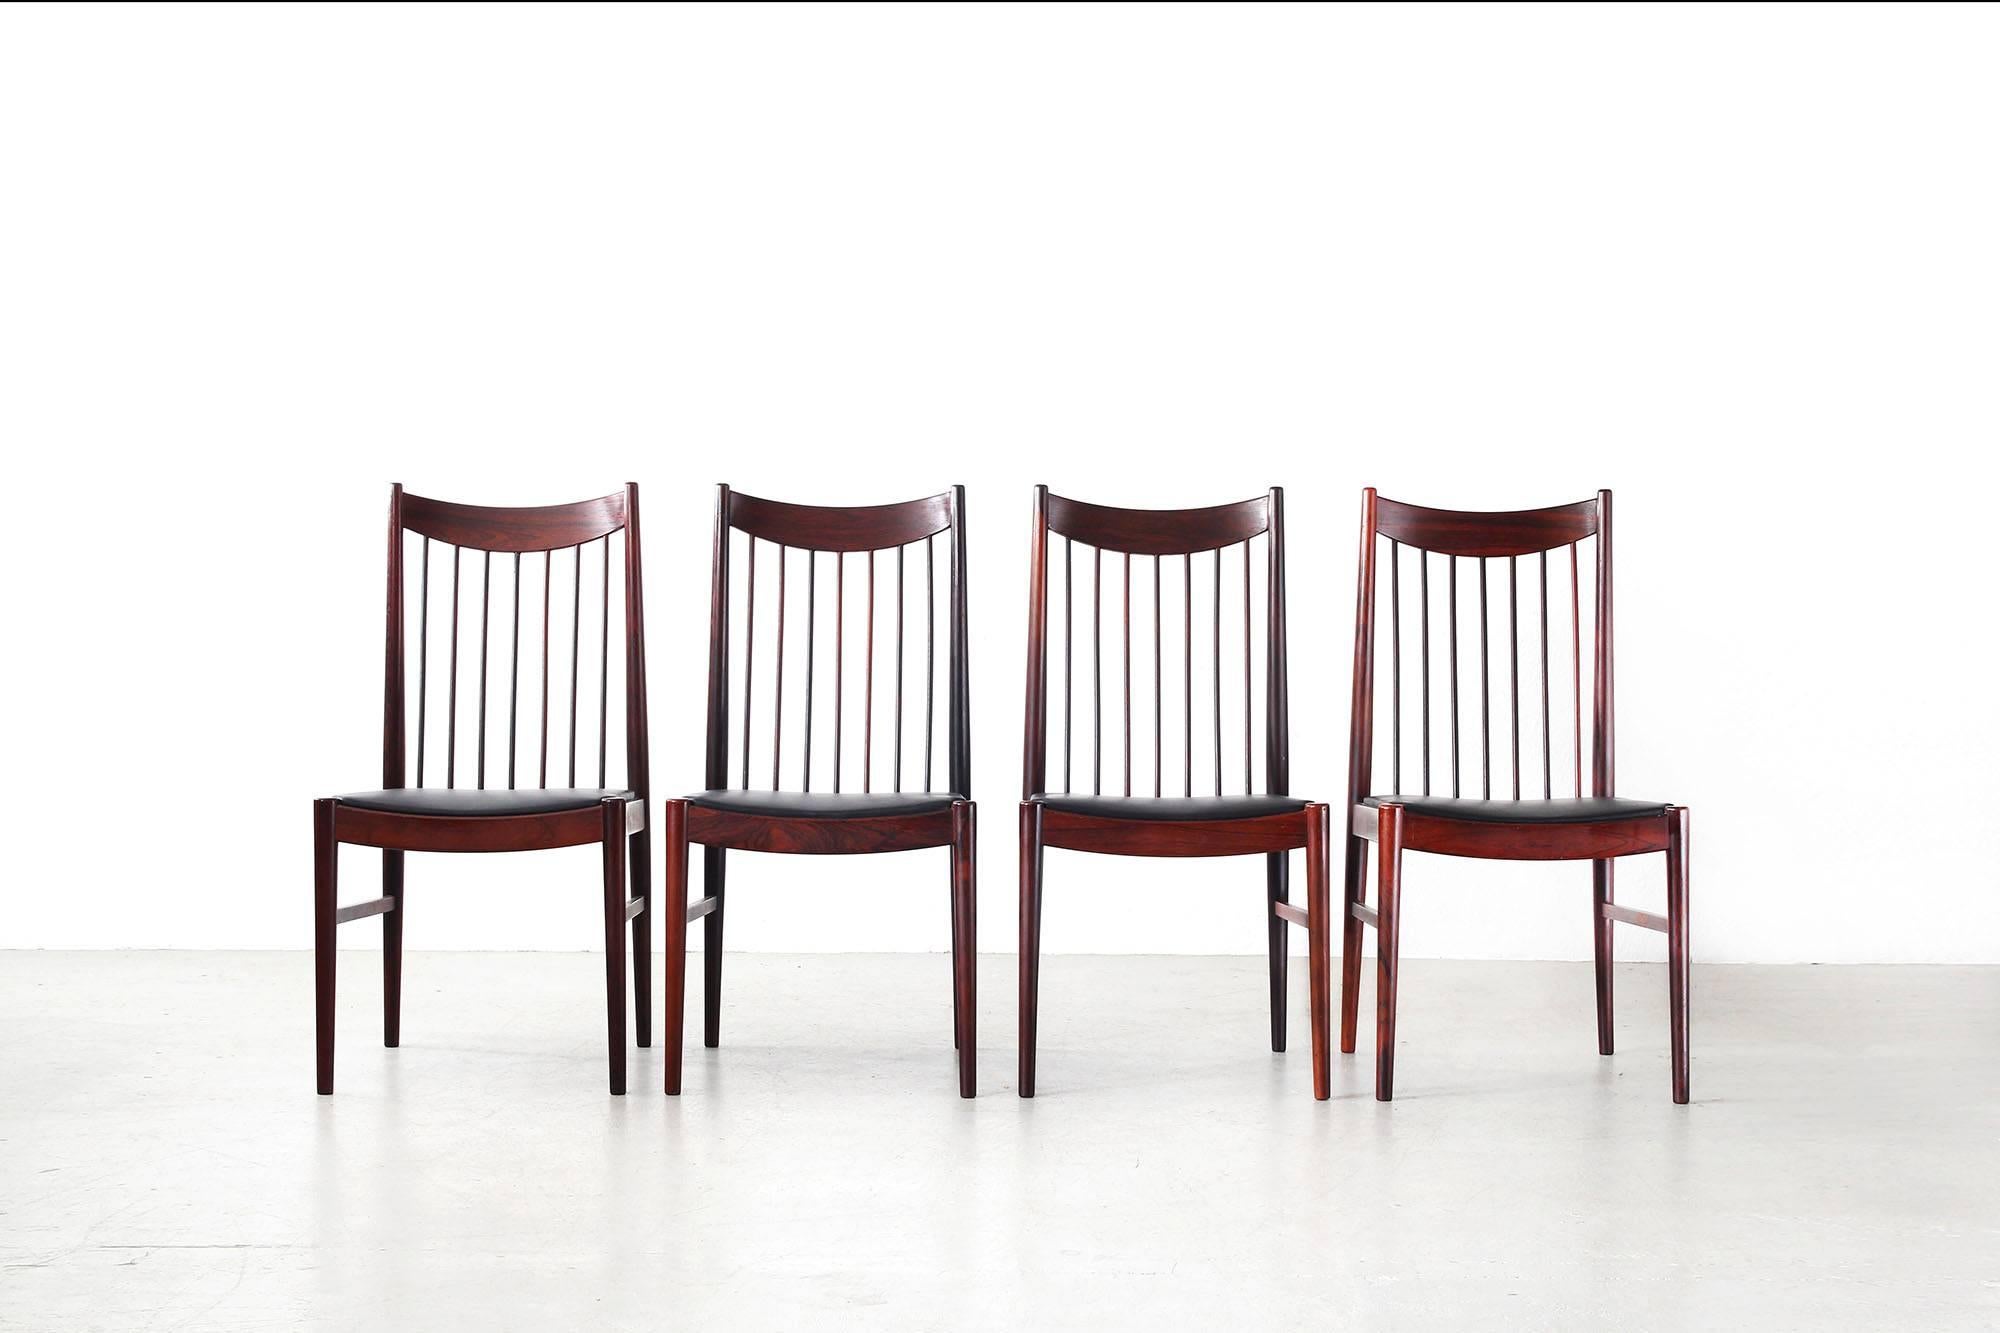 A beautiful set of four dining chairs by Arne Vodder for Sibast.

Designer: Arne Vodder.
Manufacturer: Sibast, Made in Denmark.
Model: 422, rosewood and black leather.

These chairs are in a very good condition.
All chairs were newly